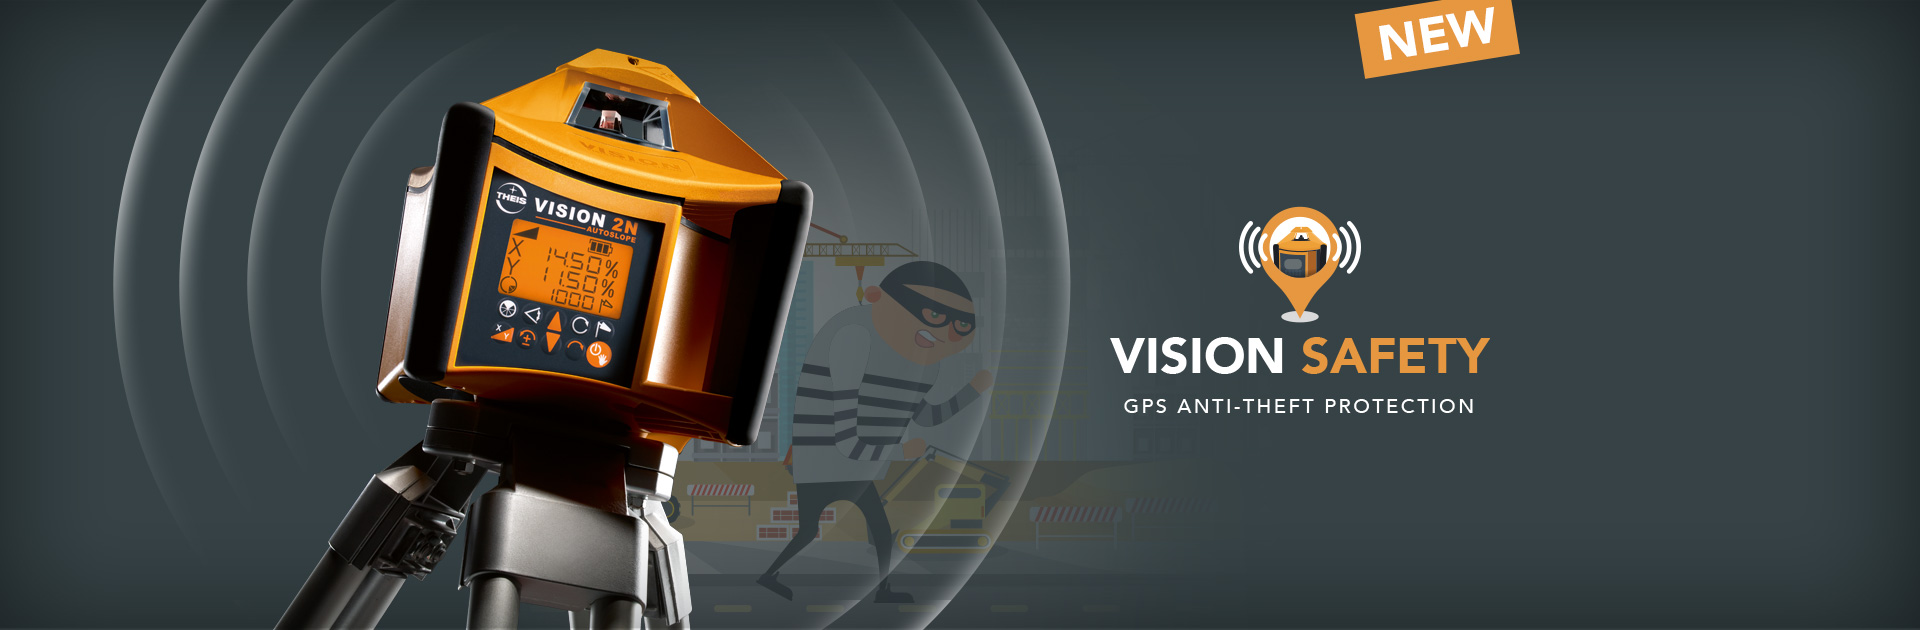 Vision Safety